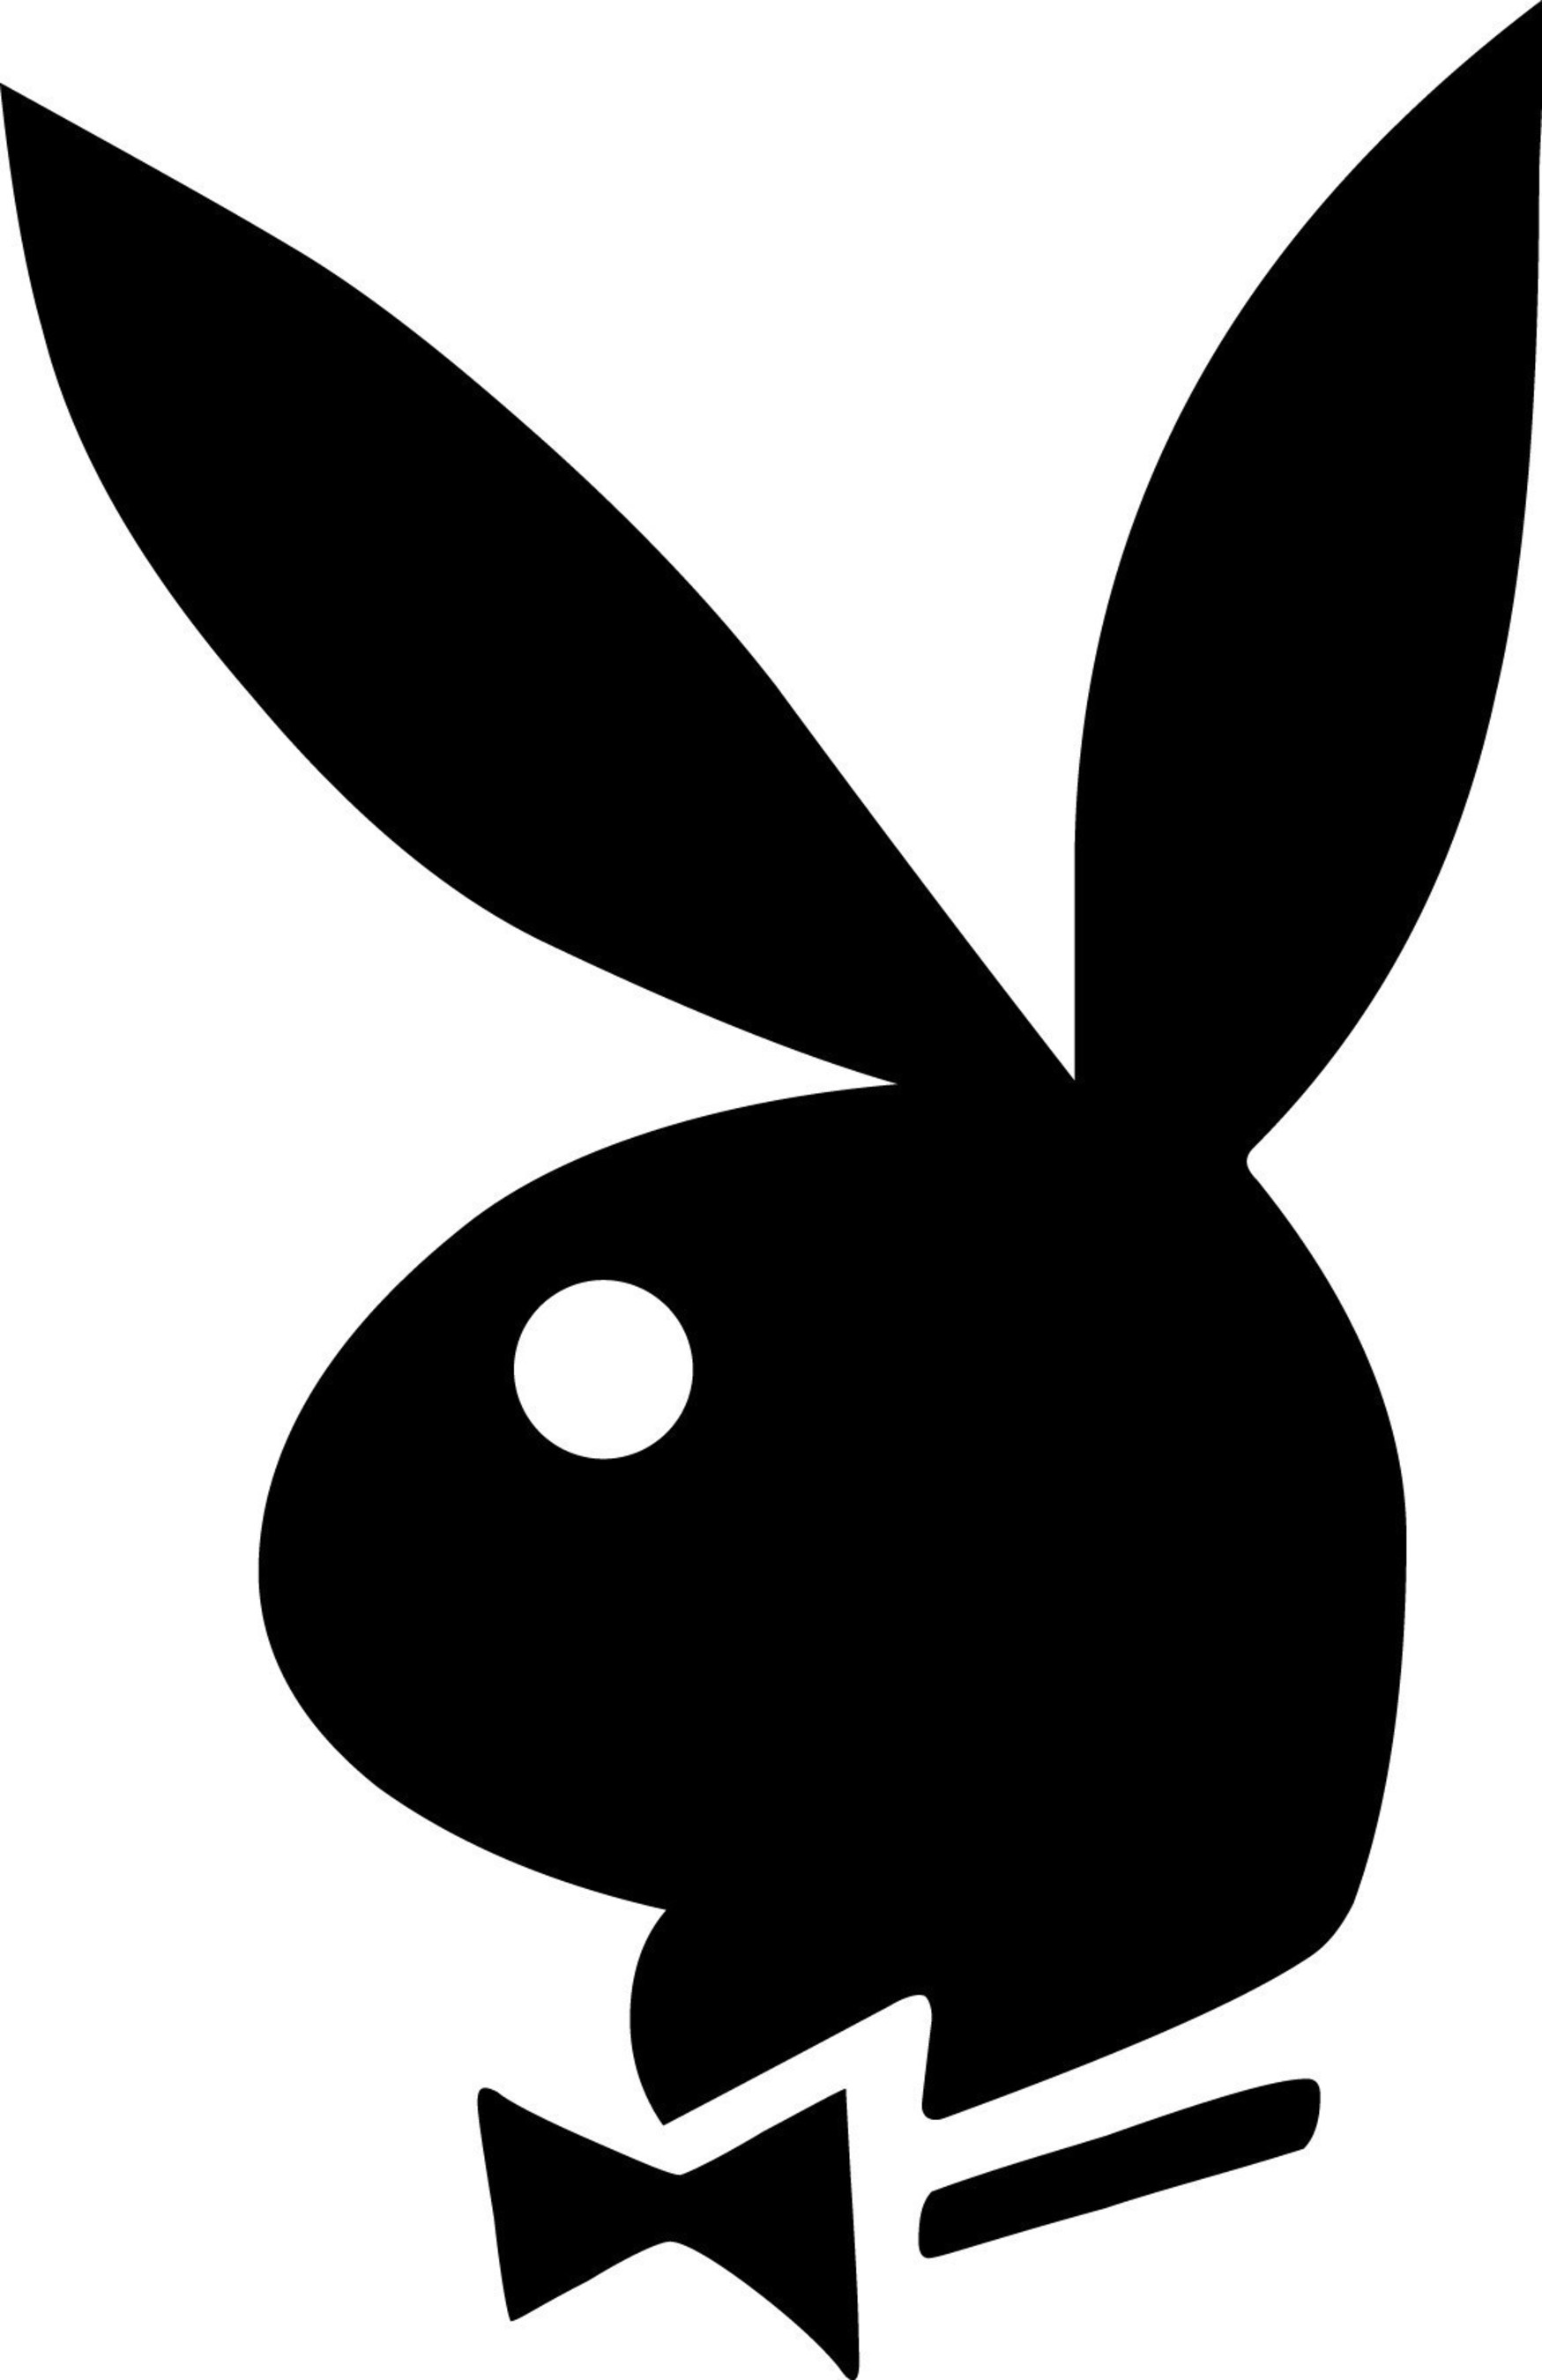 playboy magazine now available in the itunes app and google play stores for the first time ever